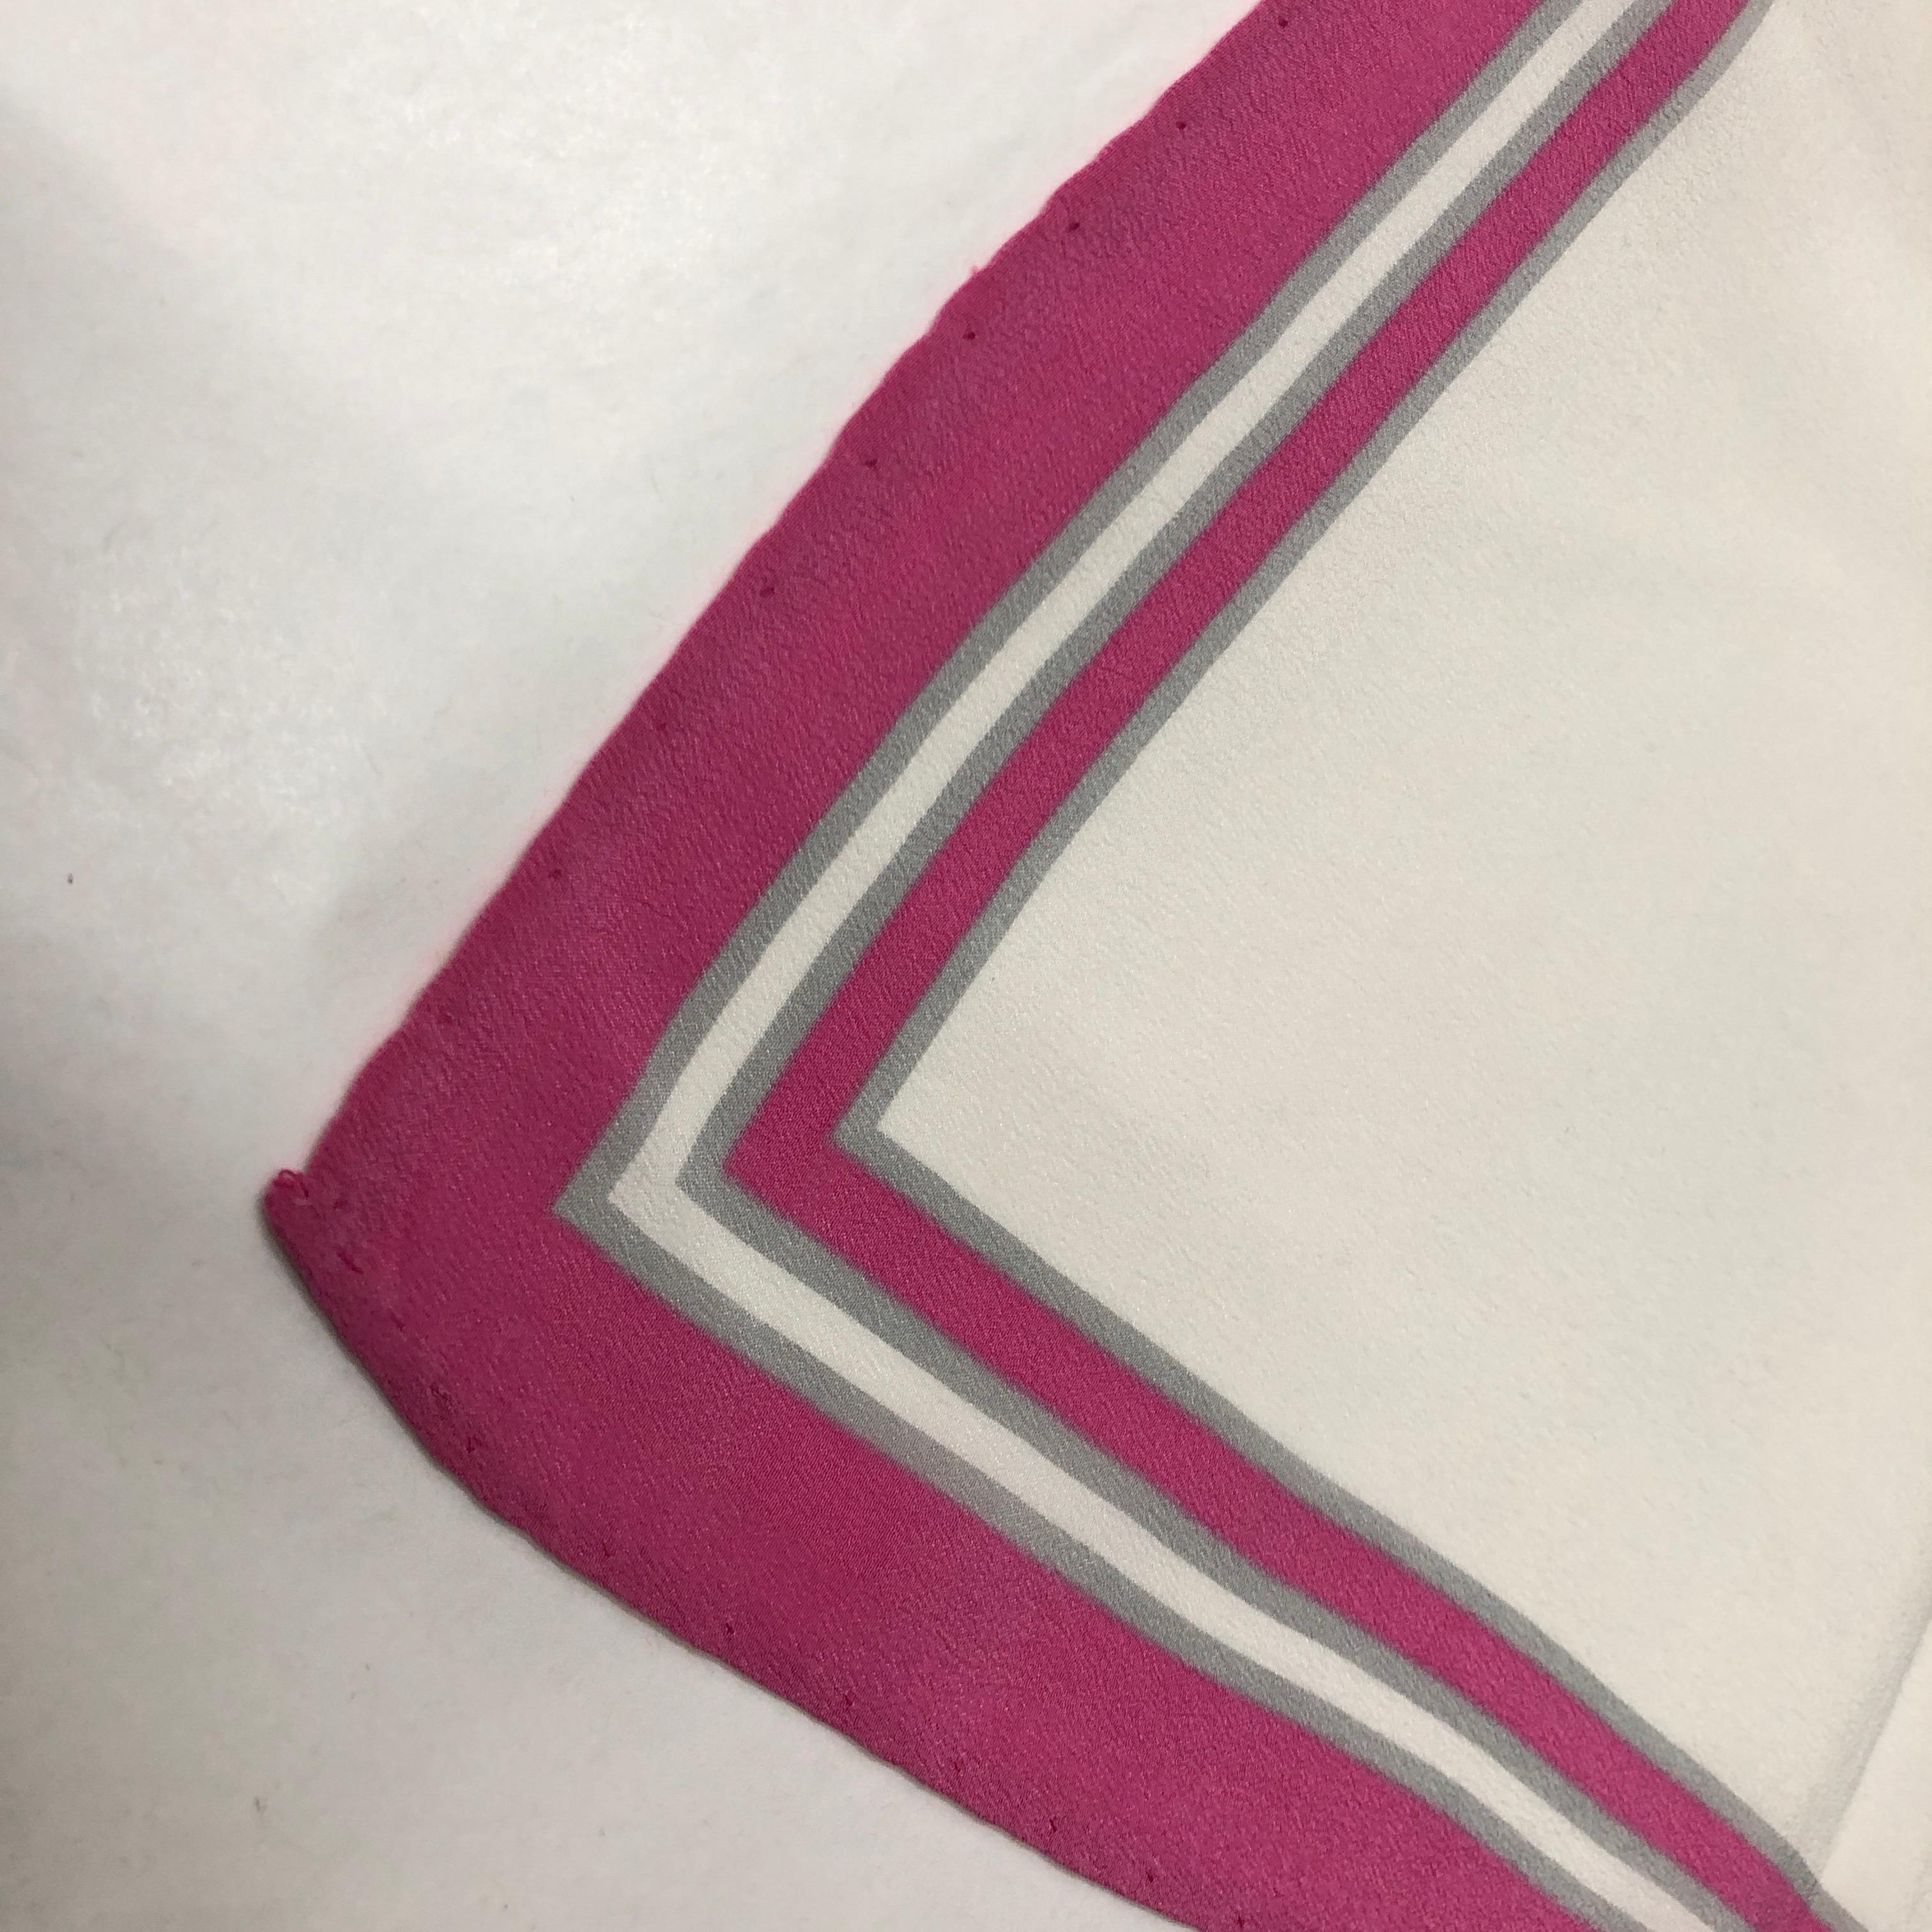 A pink and white foulard made by Mila Schon, it's in perfect conditions